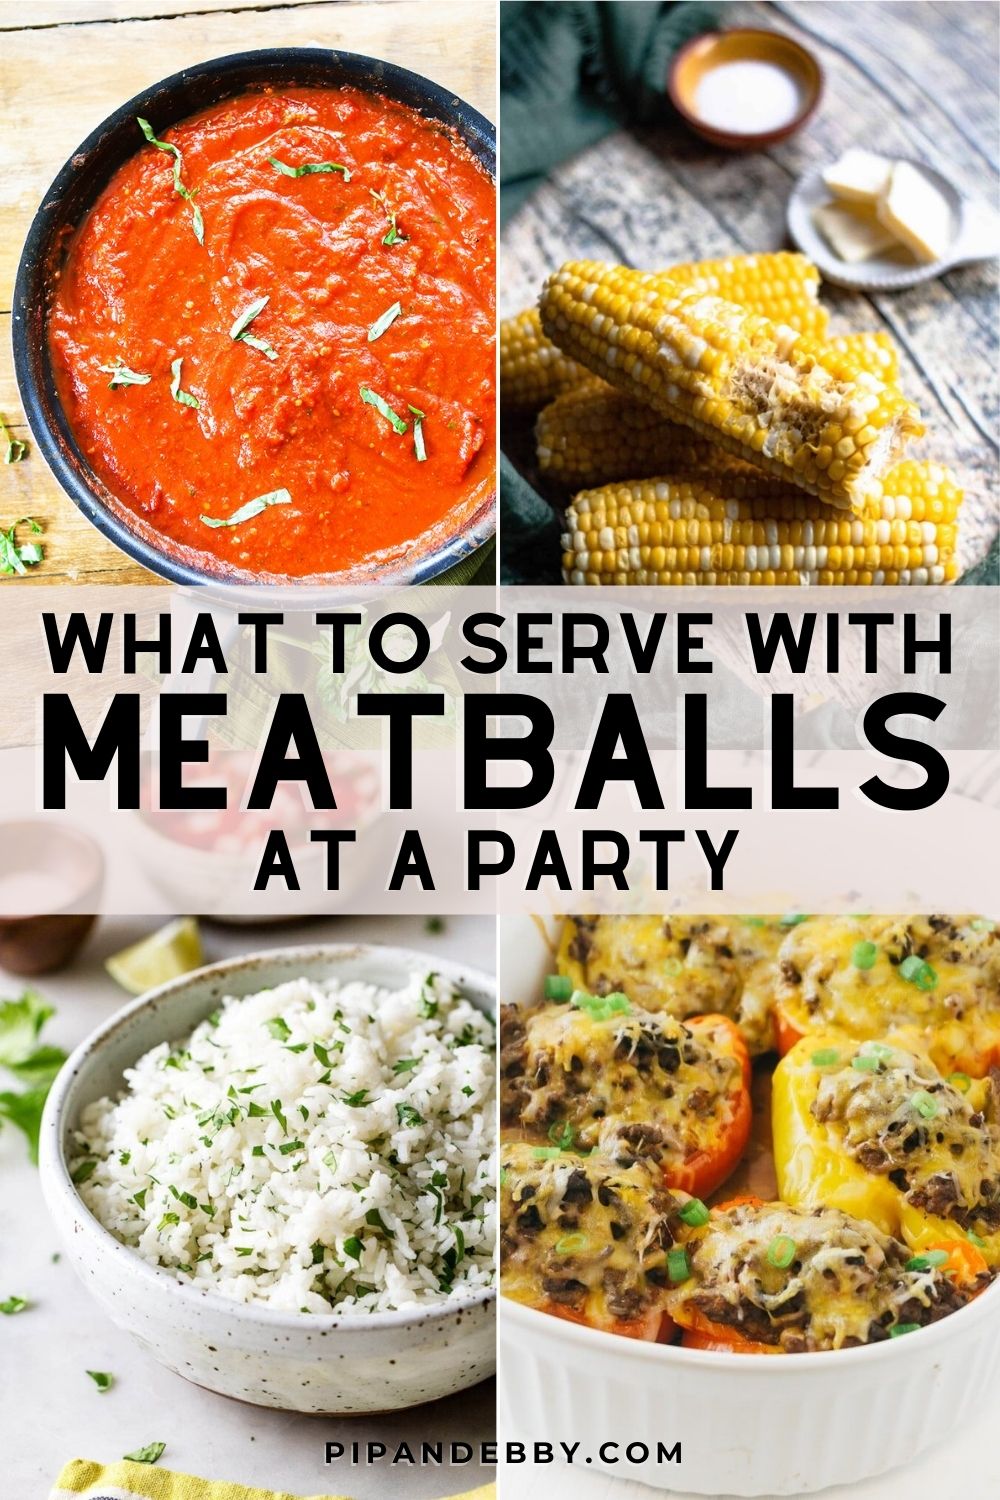 Grid of four food photos with text overlay reading, "What to serve with meatballs at a party."